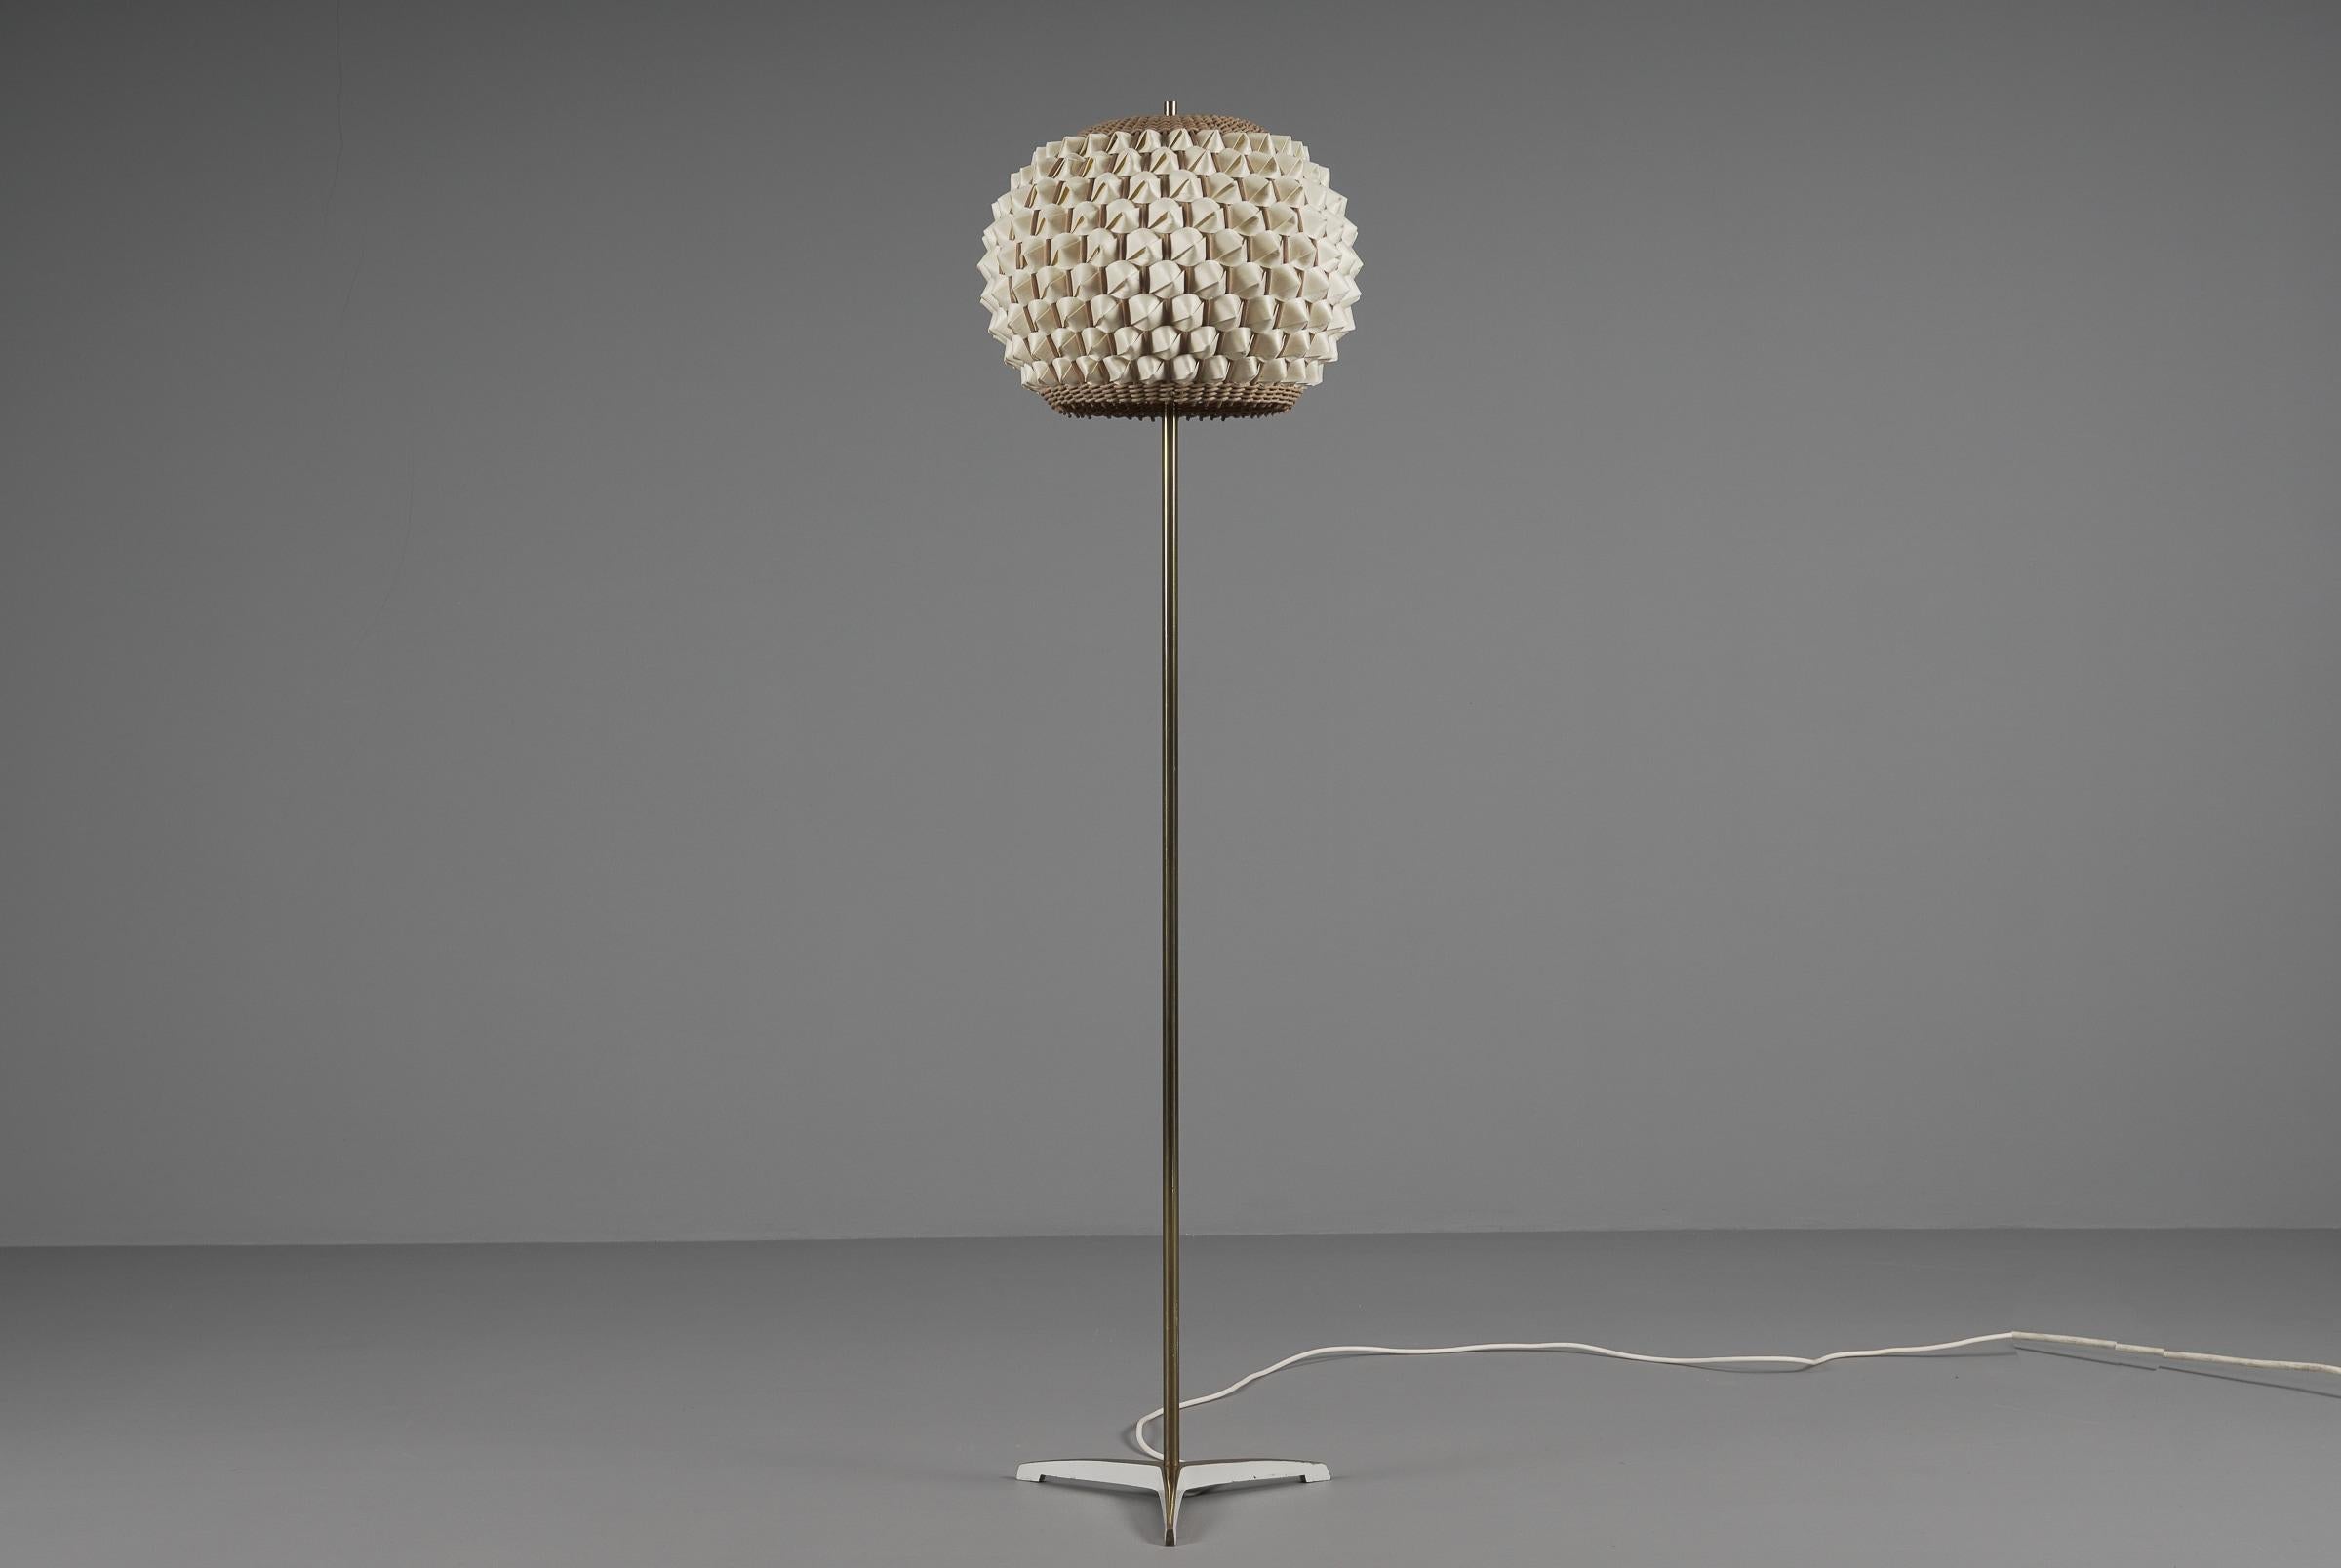 Mid-Century Modern Tripod Floor Lamp with Wicker Lamp Shade, 1950s Italy For Sale